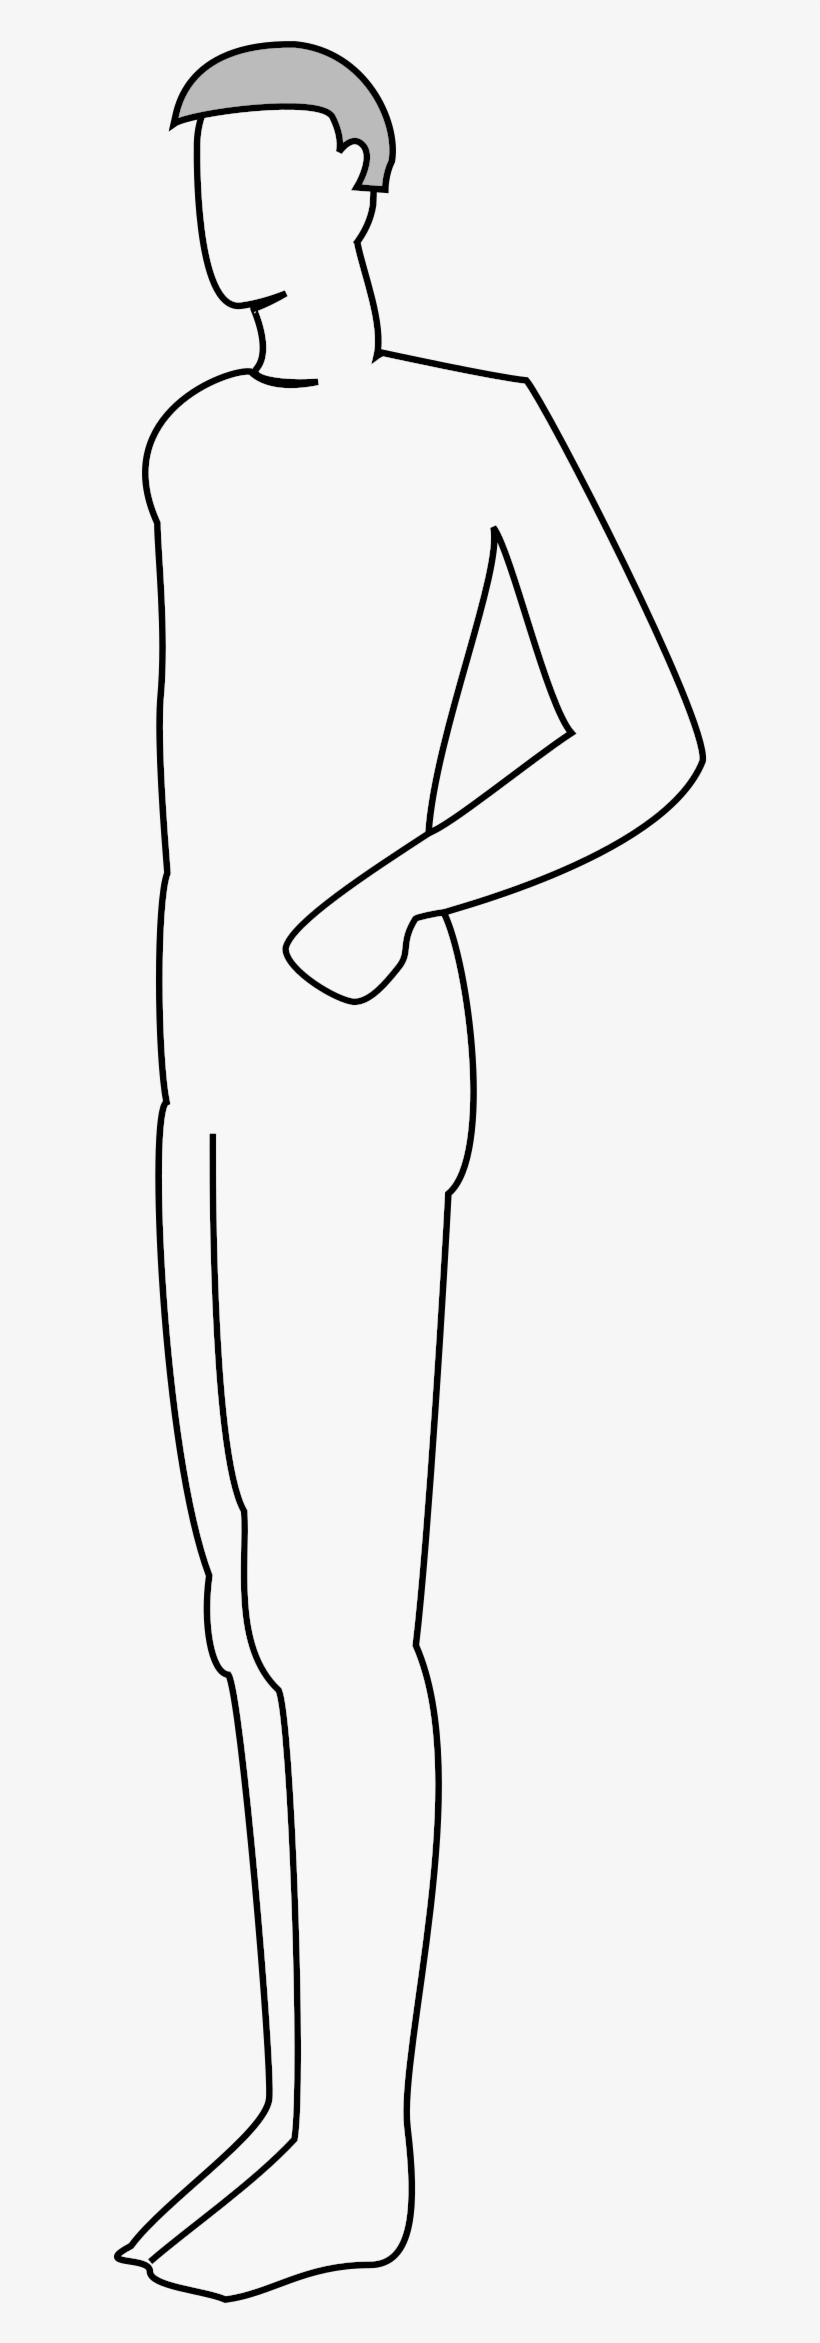 This Free Icons Png Design Of Male Body Silhouette, transparent png #551826